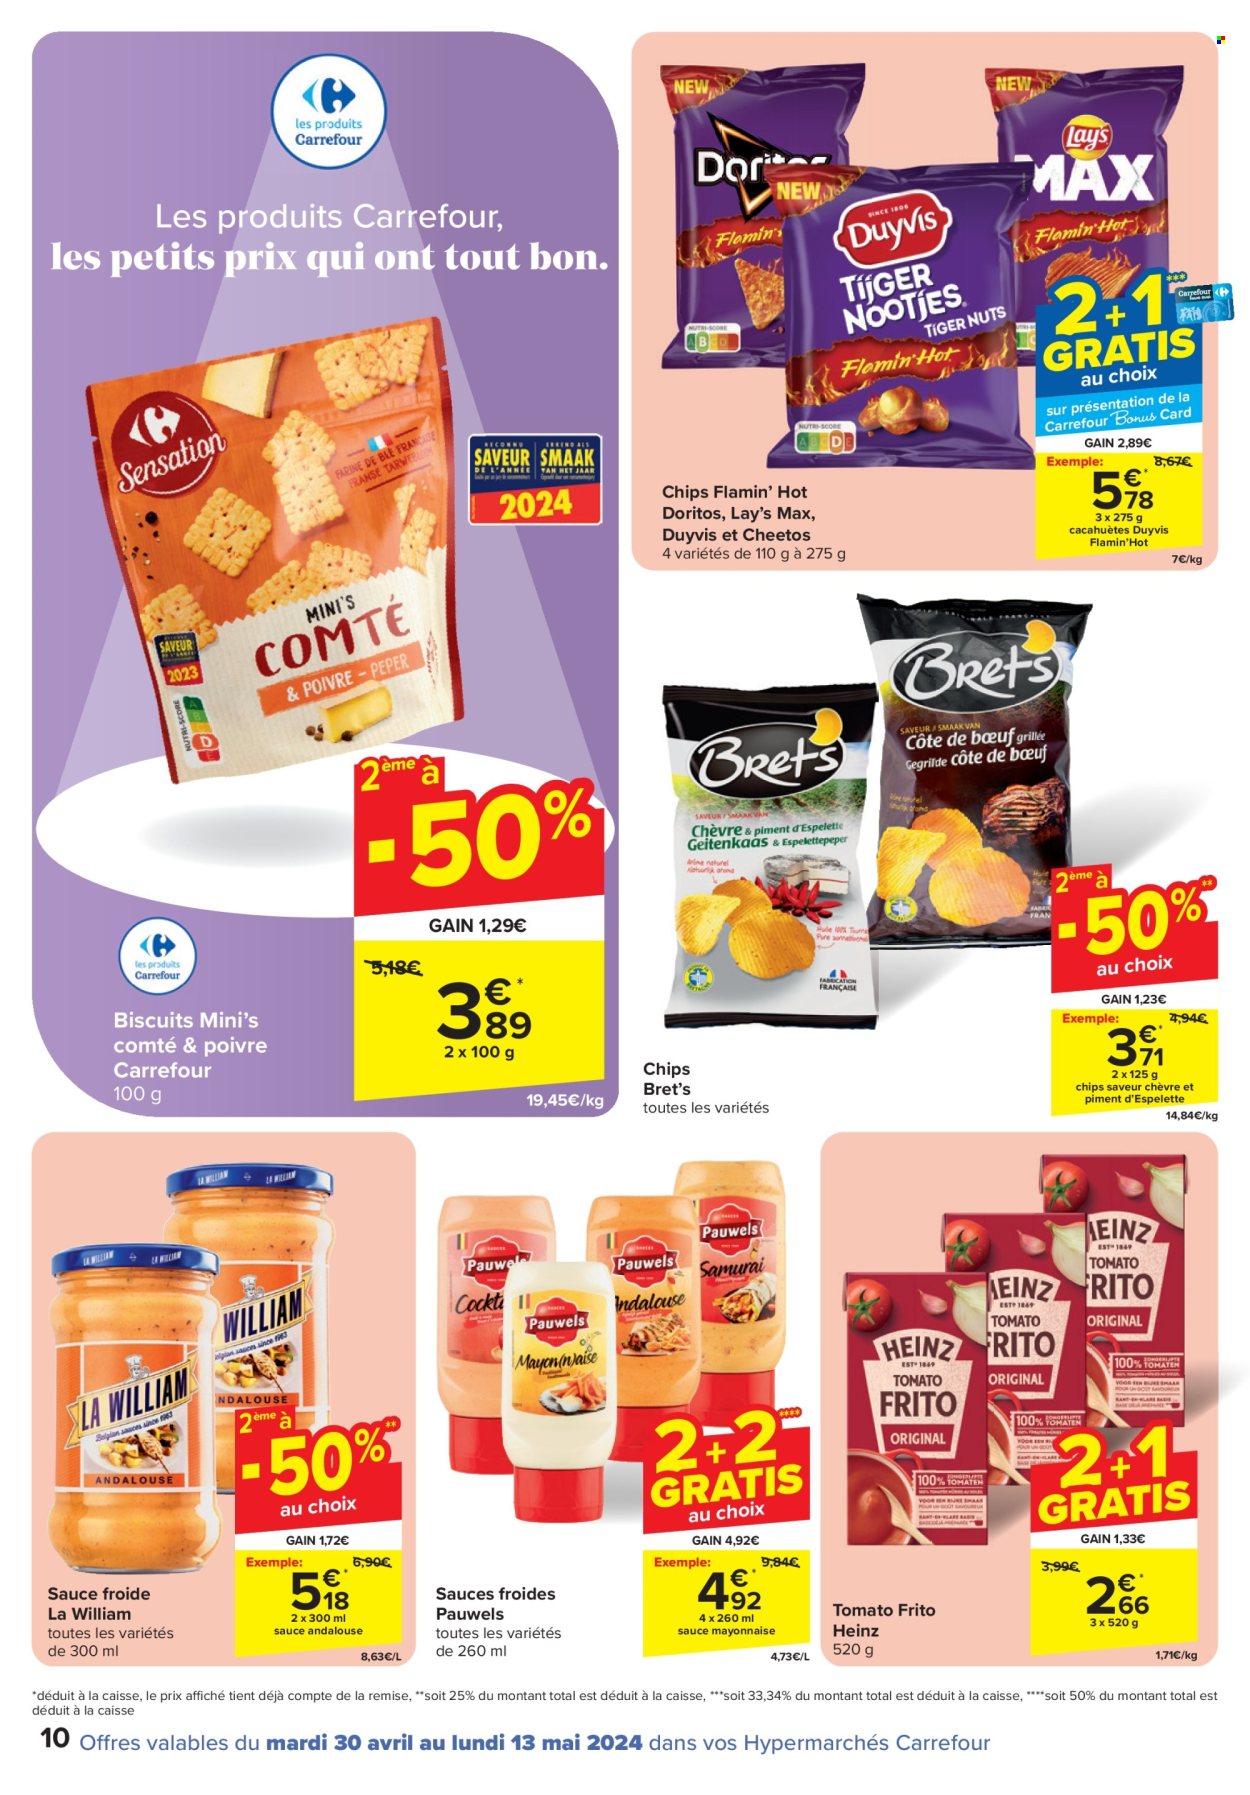 thumbnail - Catalogue Carrefour hypermarkt - 30/04/2024 - 13/05/2024 - Produits soldés - fromage, mayonnaise, cacahuètes, biscuits, chips, Lay’s, Doritos, Heinz. Page 10.